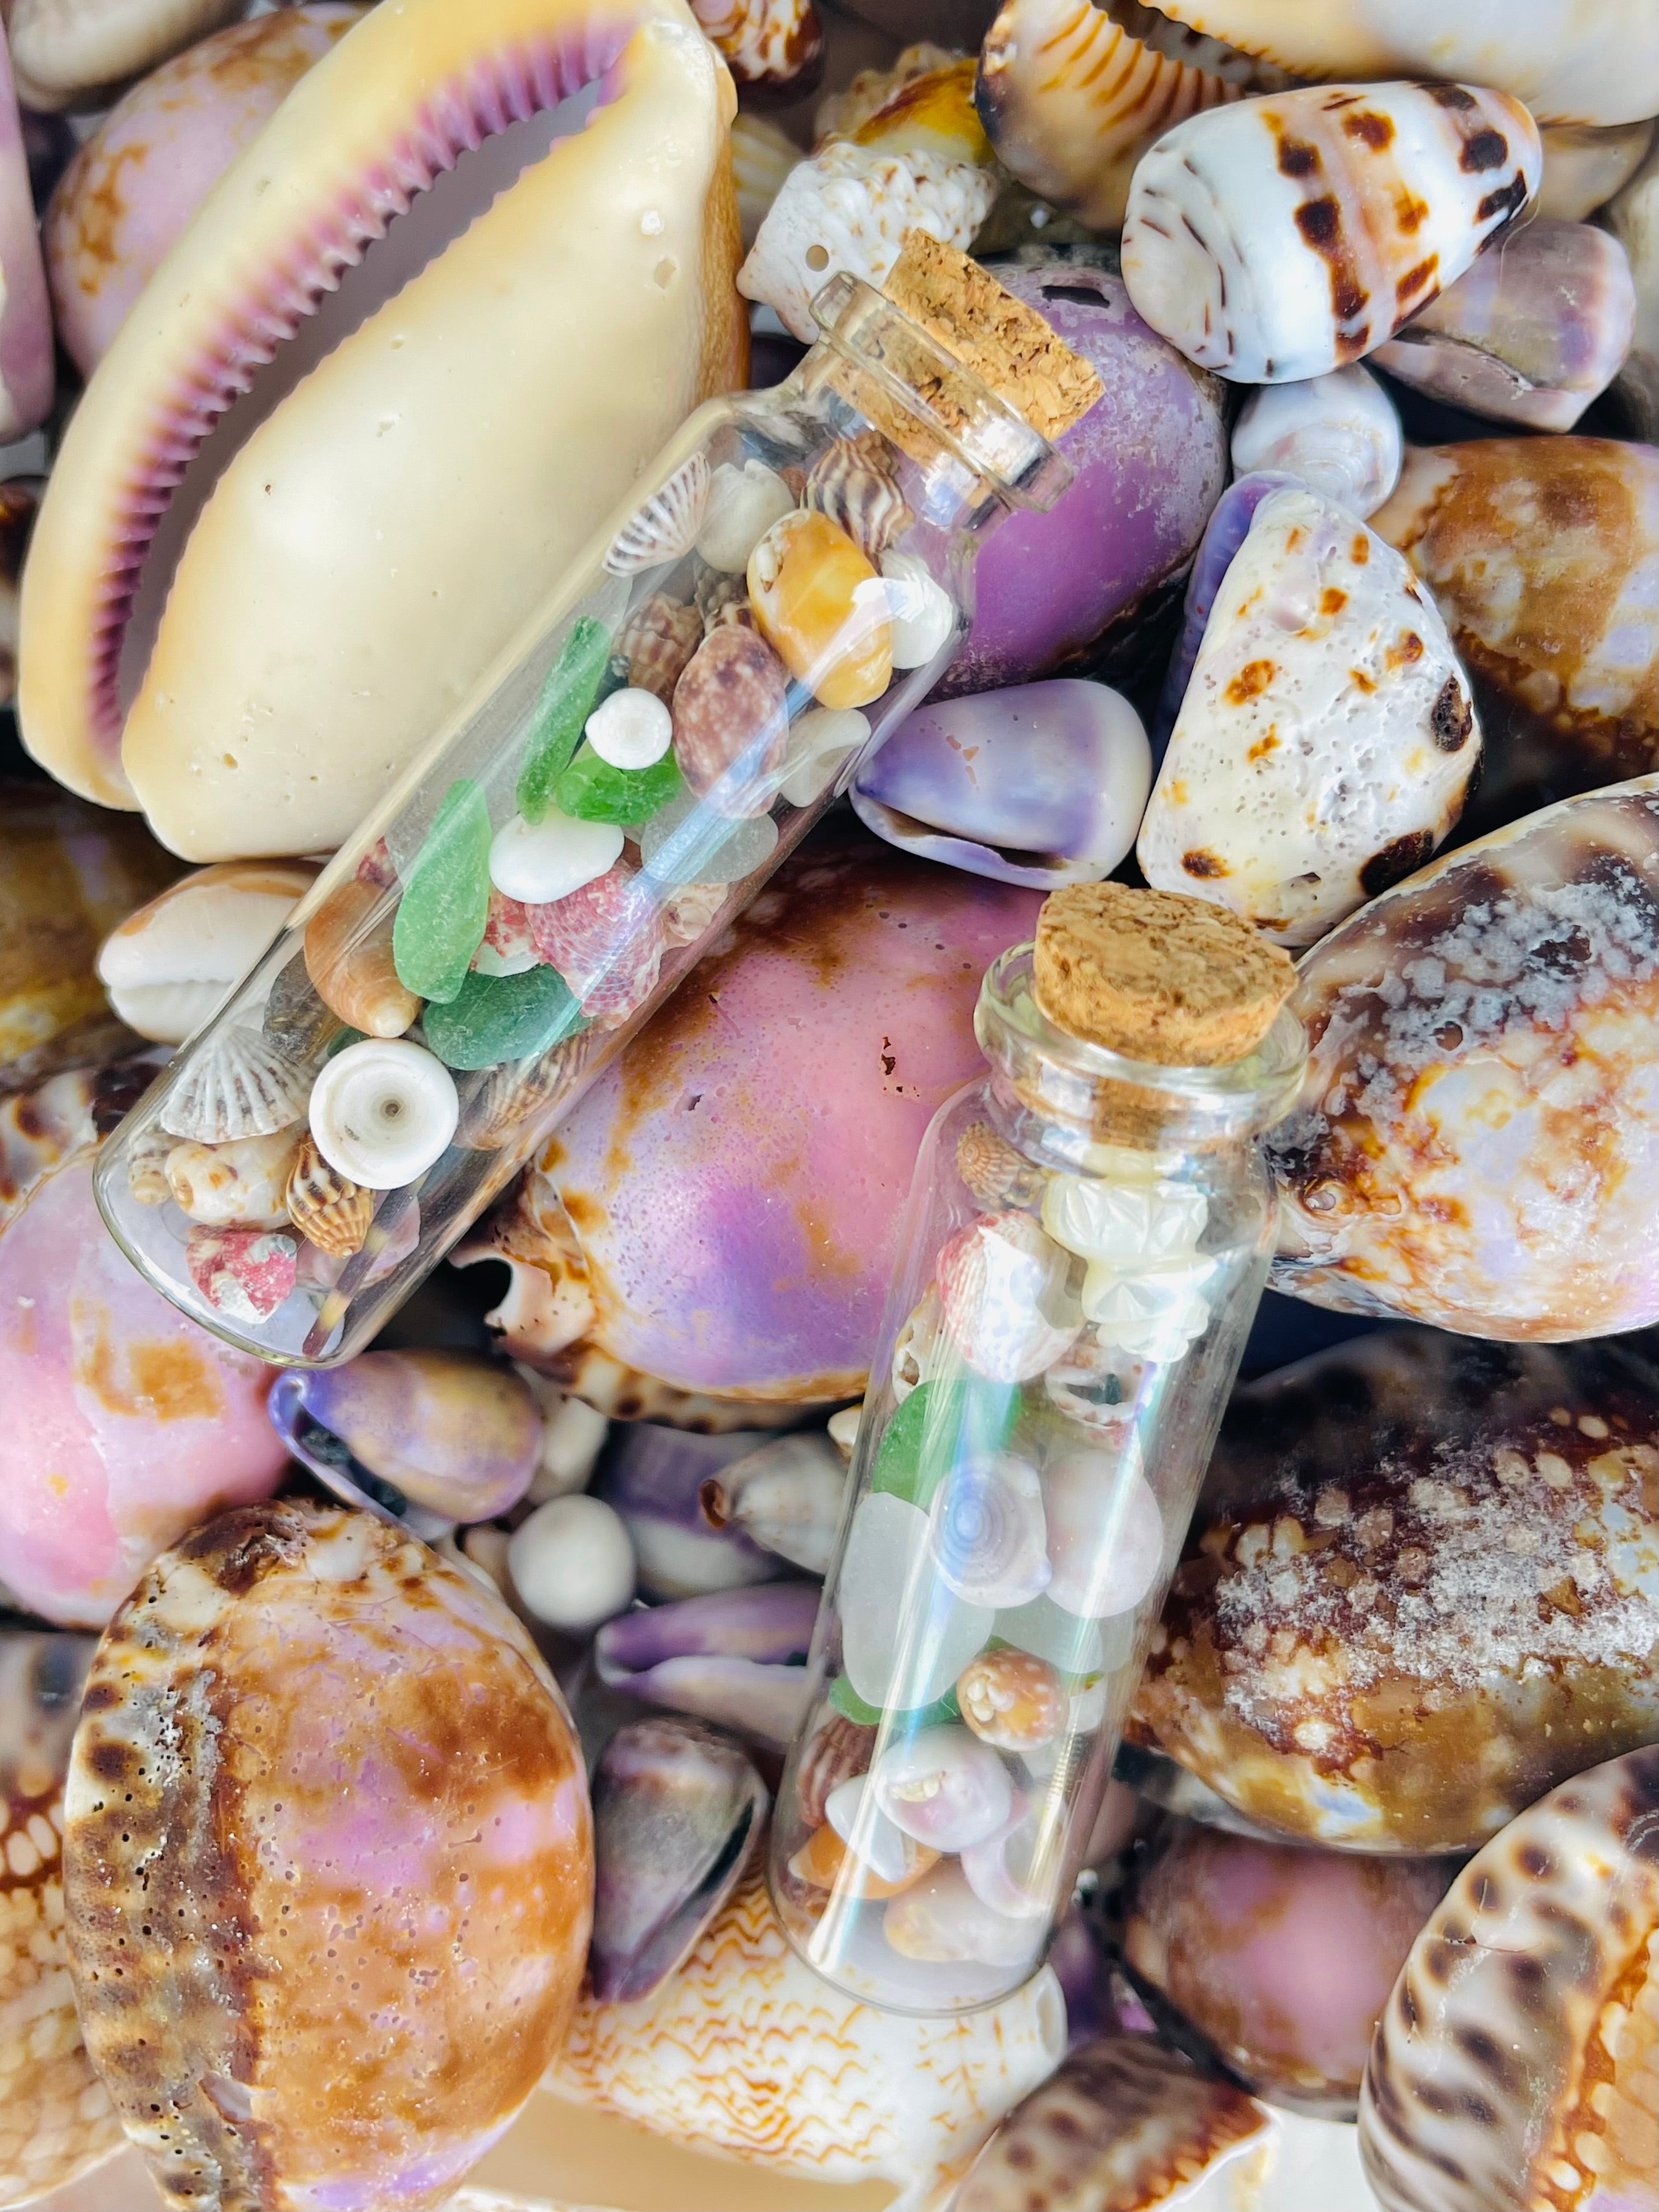 Small jars lay on a bed on colorful shells. They are filled with ocean treasures like shells and beach glass from Hawaii.